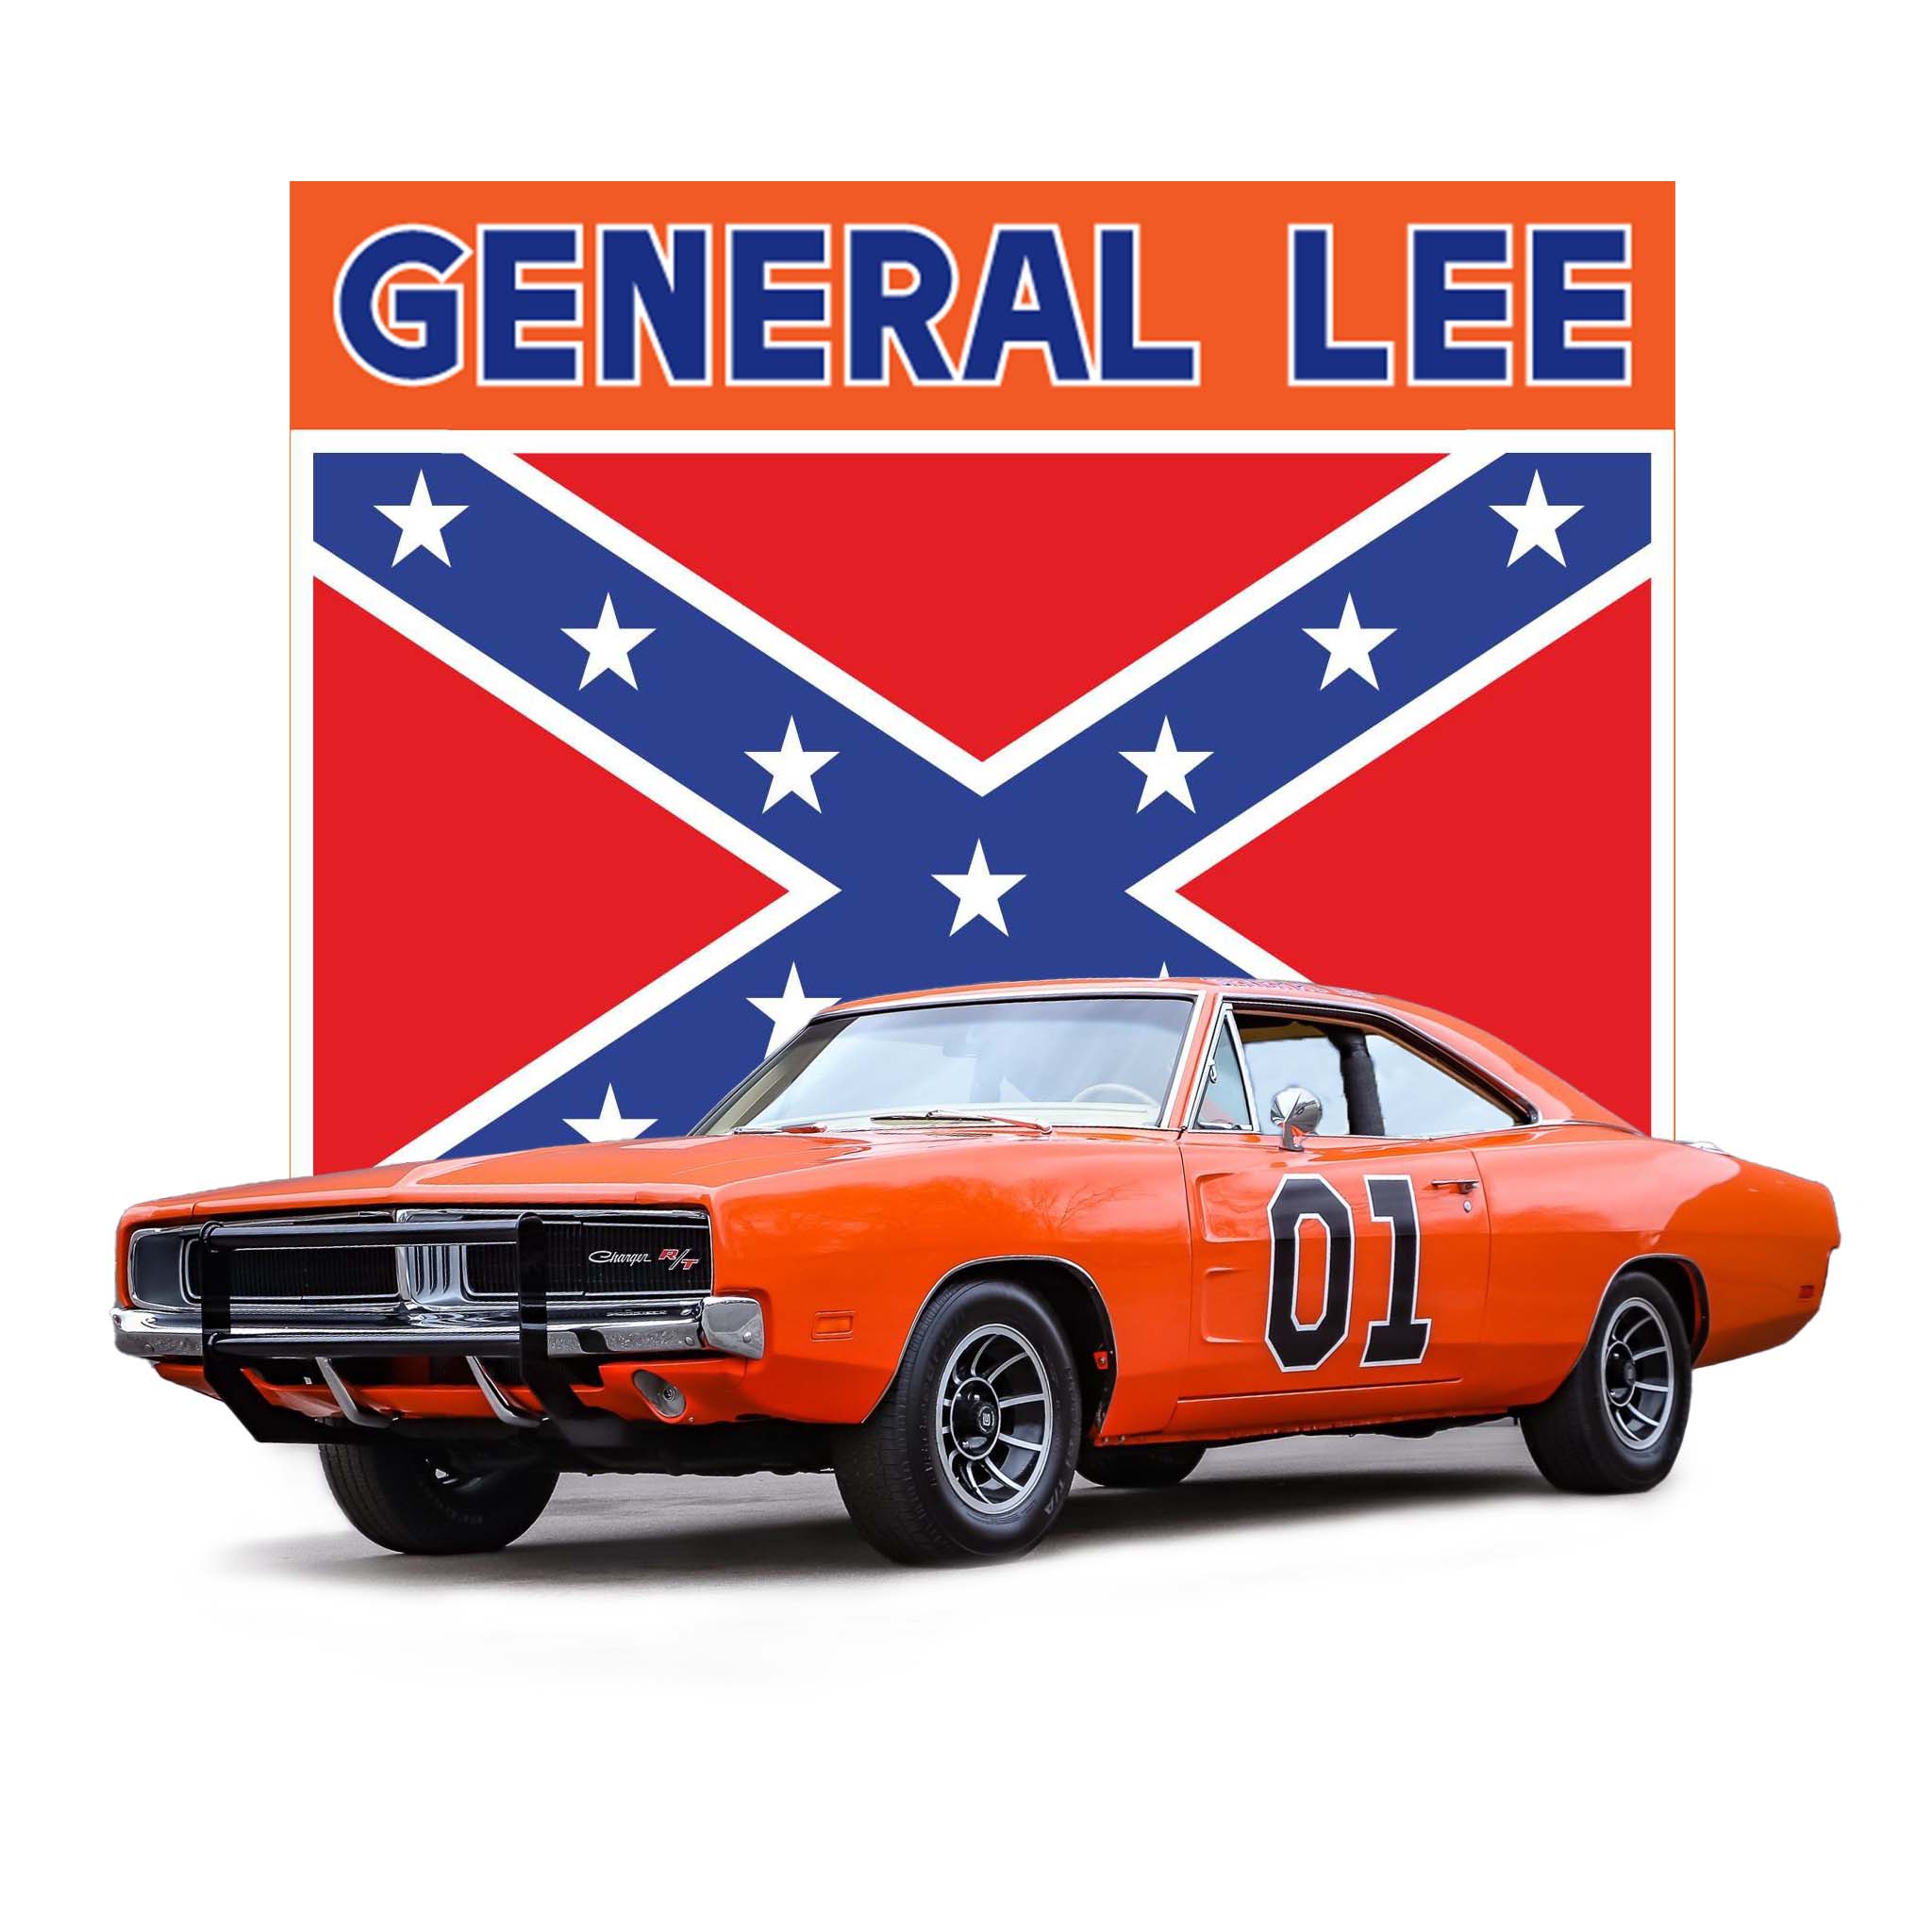 DODGE CHARGER - THE GENERAL LEE | Custom Car Cover Co